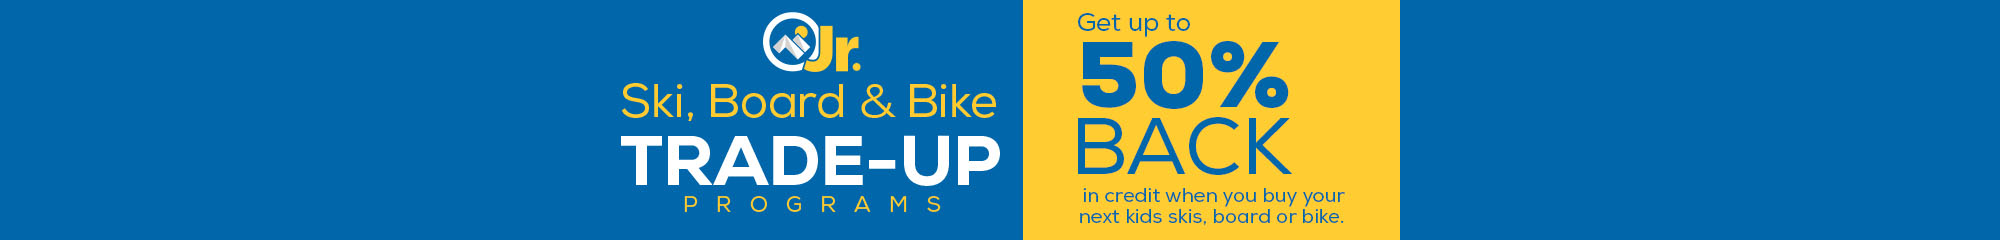 Junior Kids Ski, Snowboard & Bike Trade Up Program - Get up to 50% Back in credit when you trade in qualifying equipment.